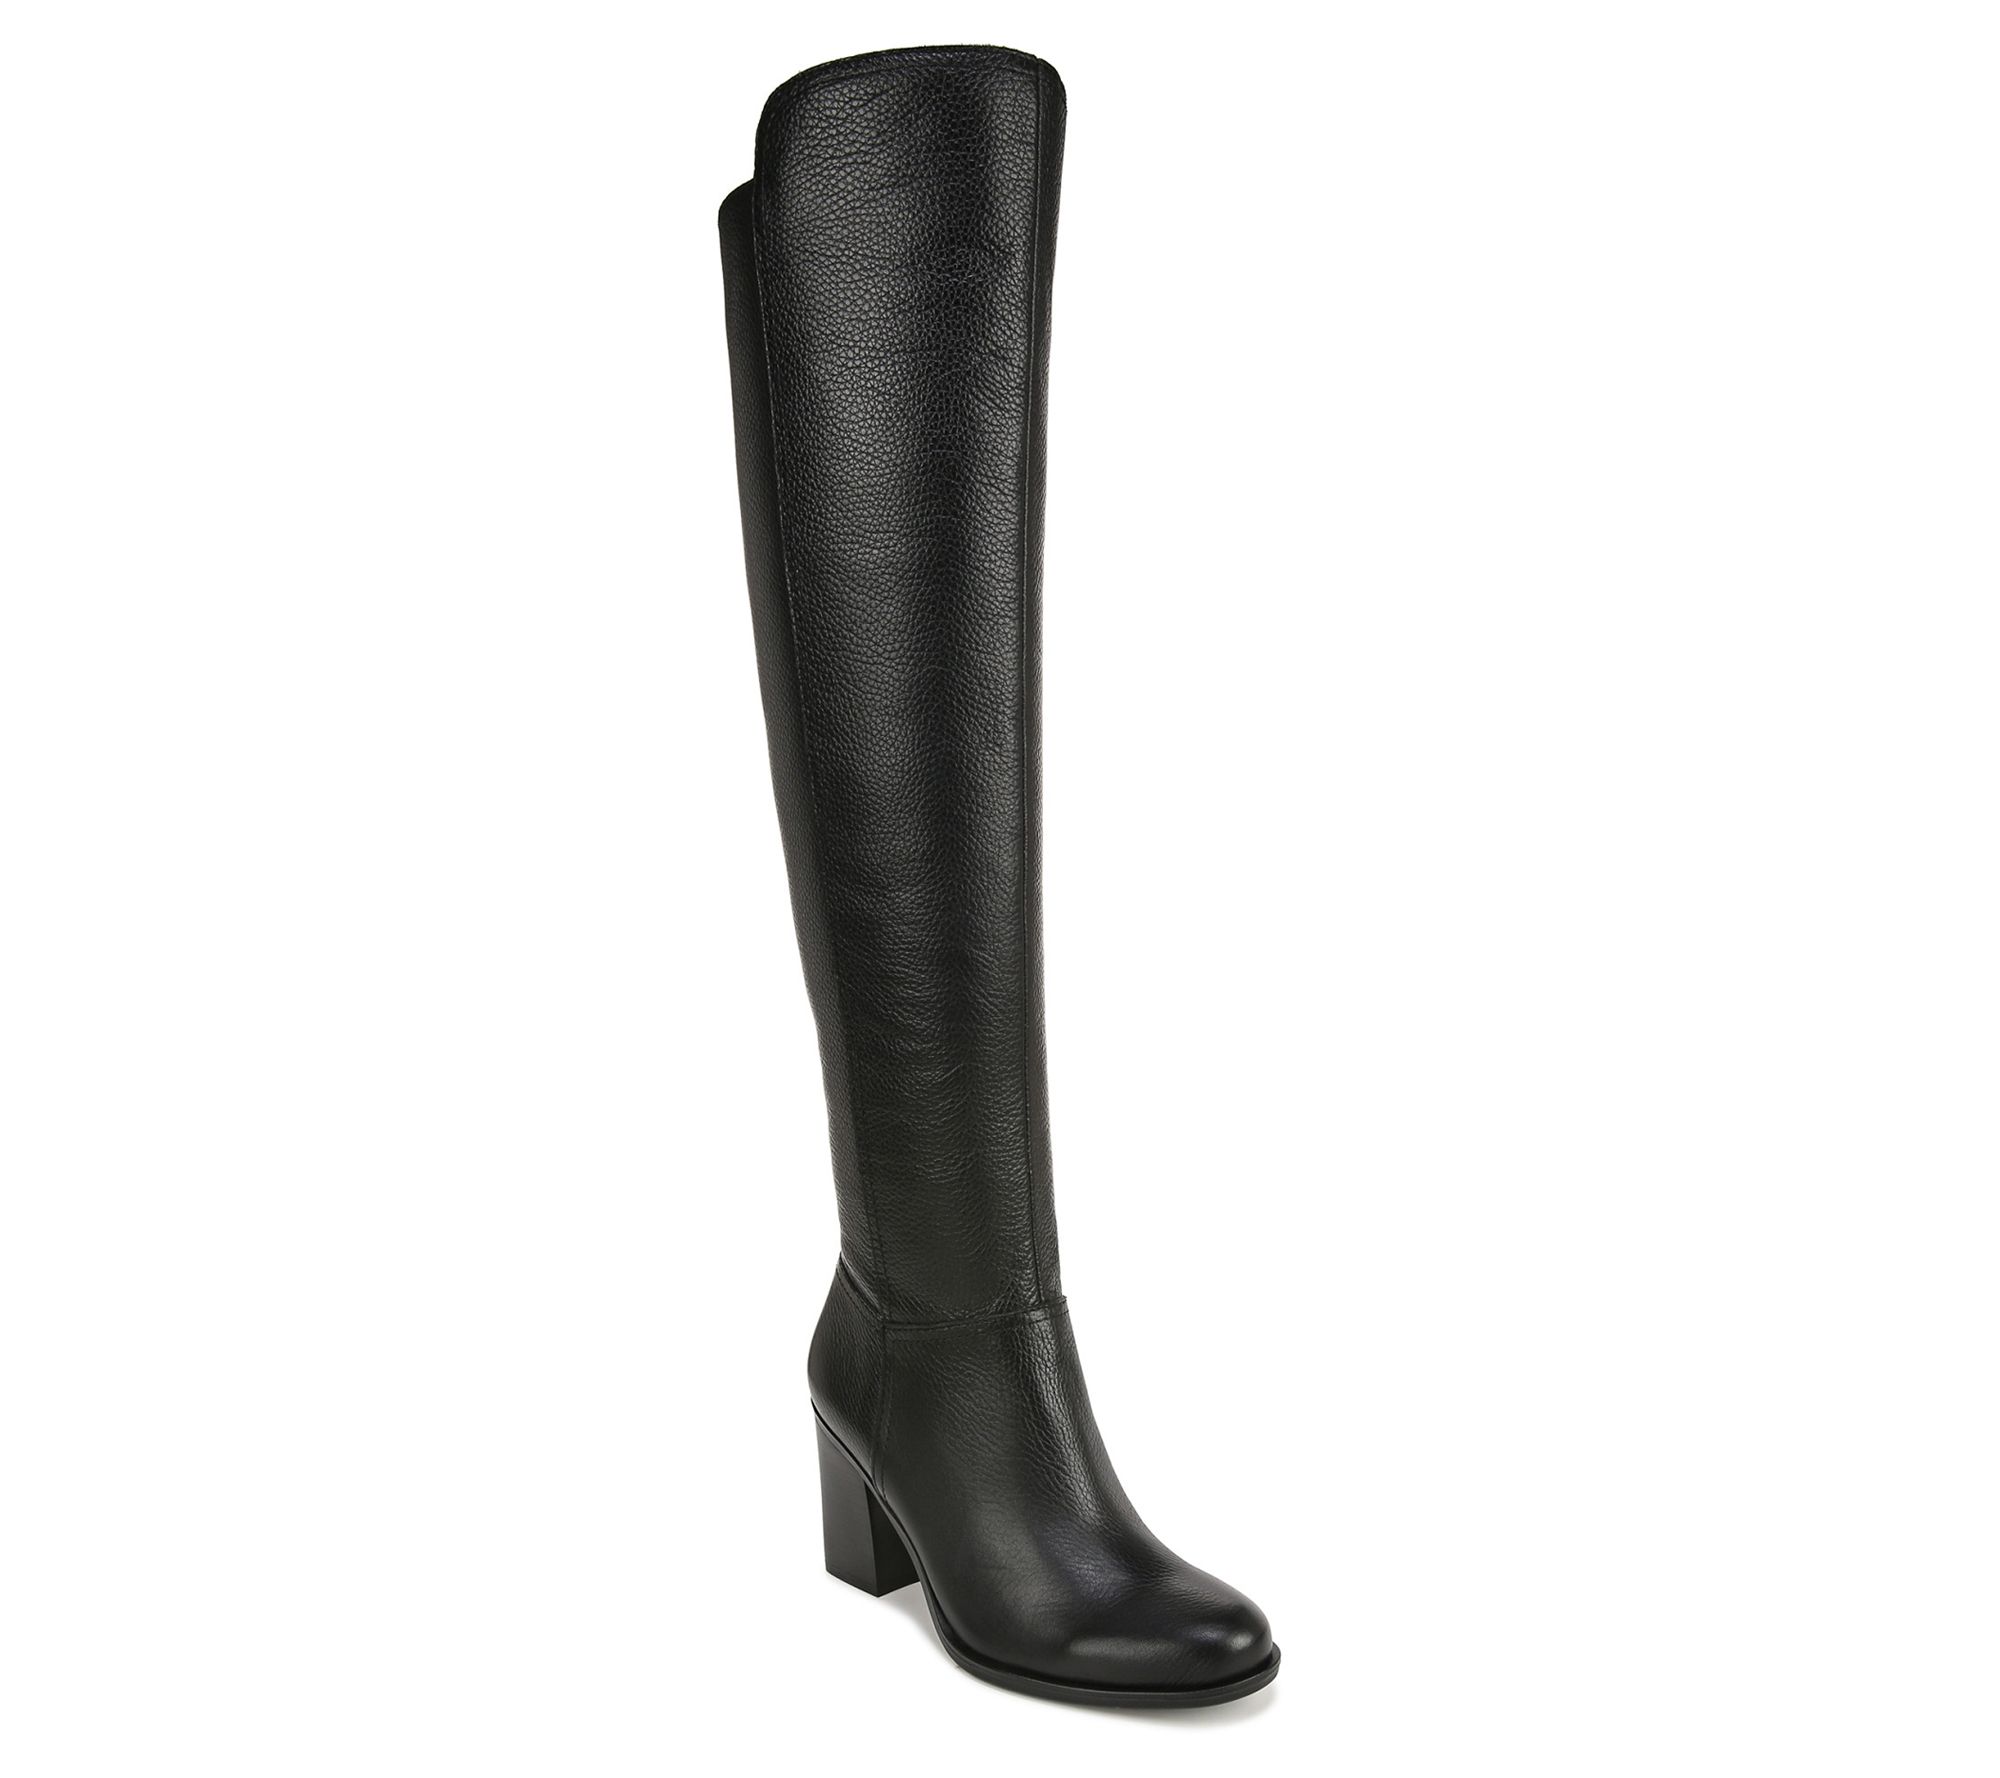 Women's Shoes 7 1/2 W - Tall Boots - Boots 